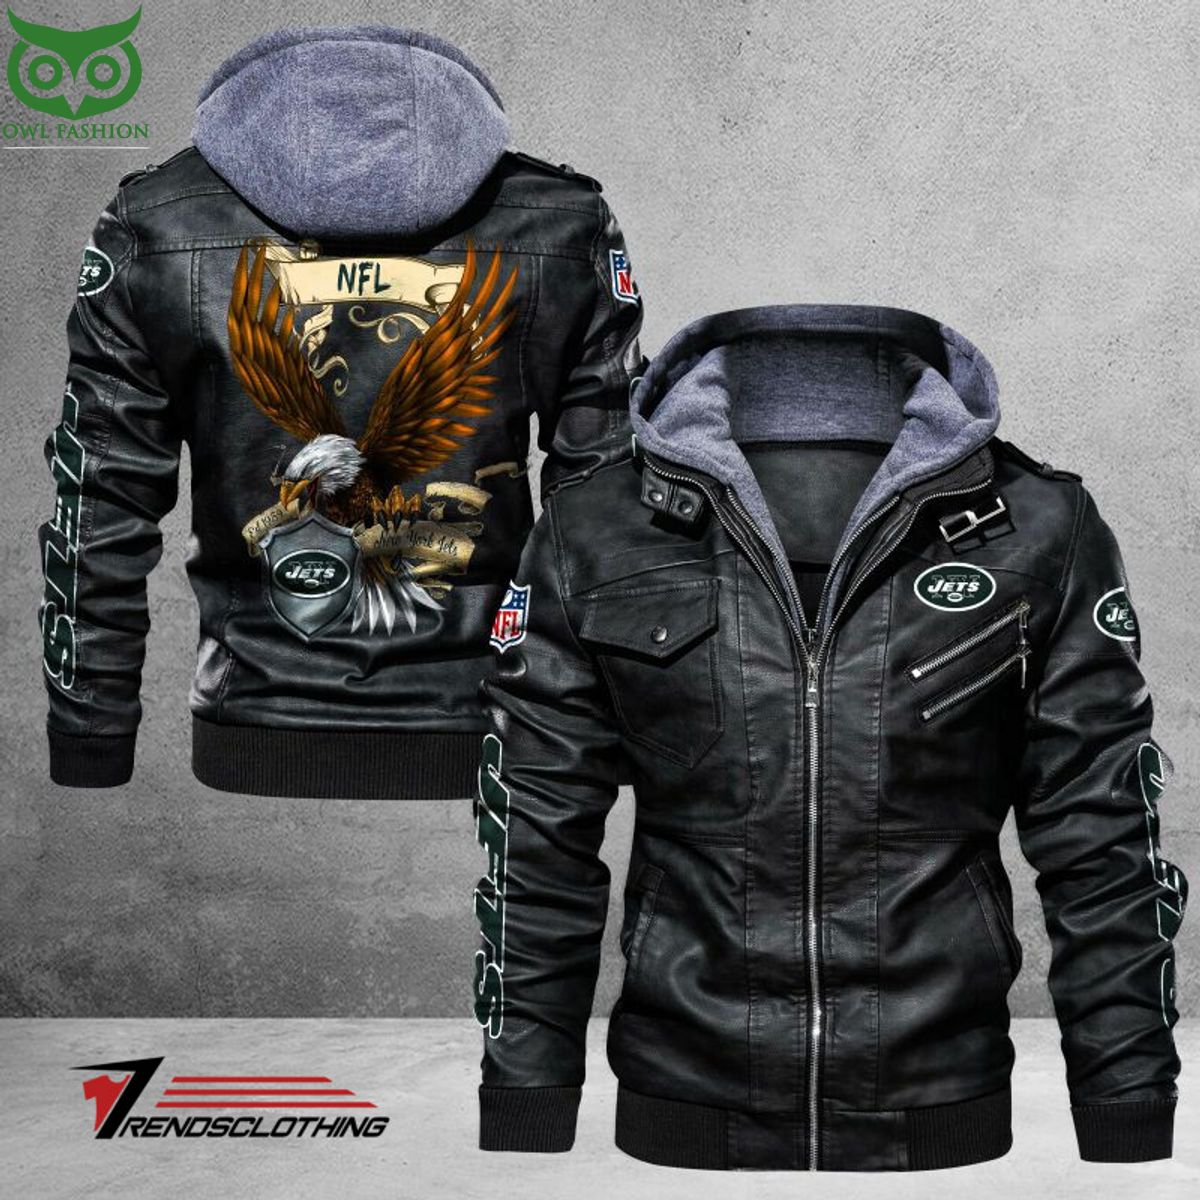 New York Jets Trending 2D Leather Jacket The use of contrast is striking.